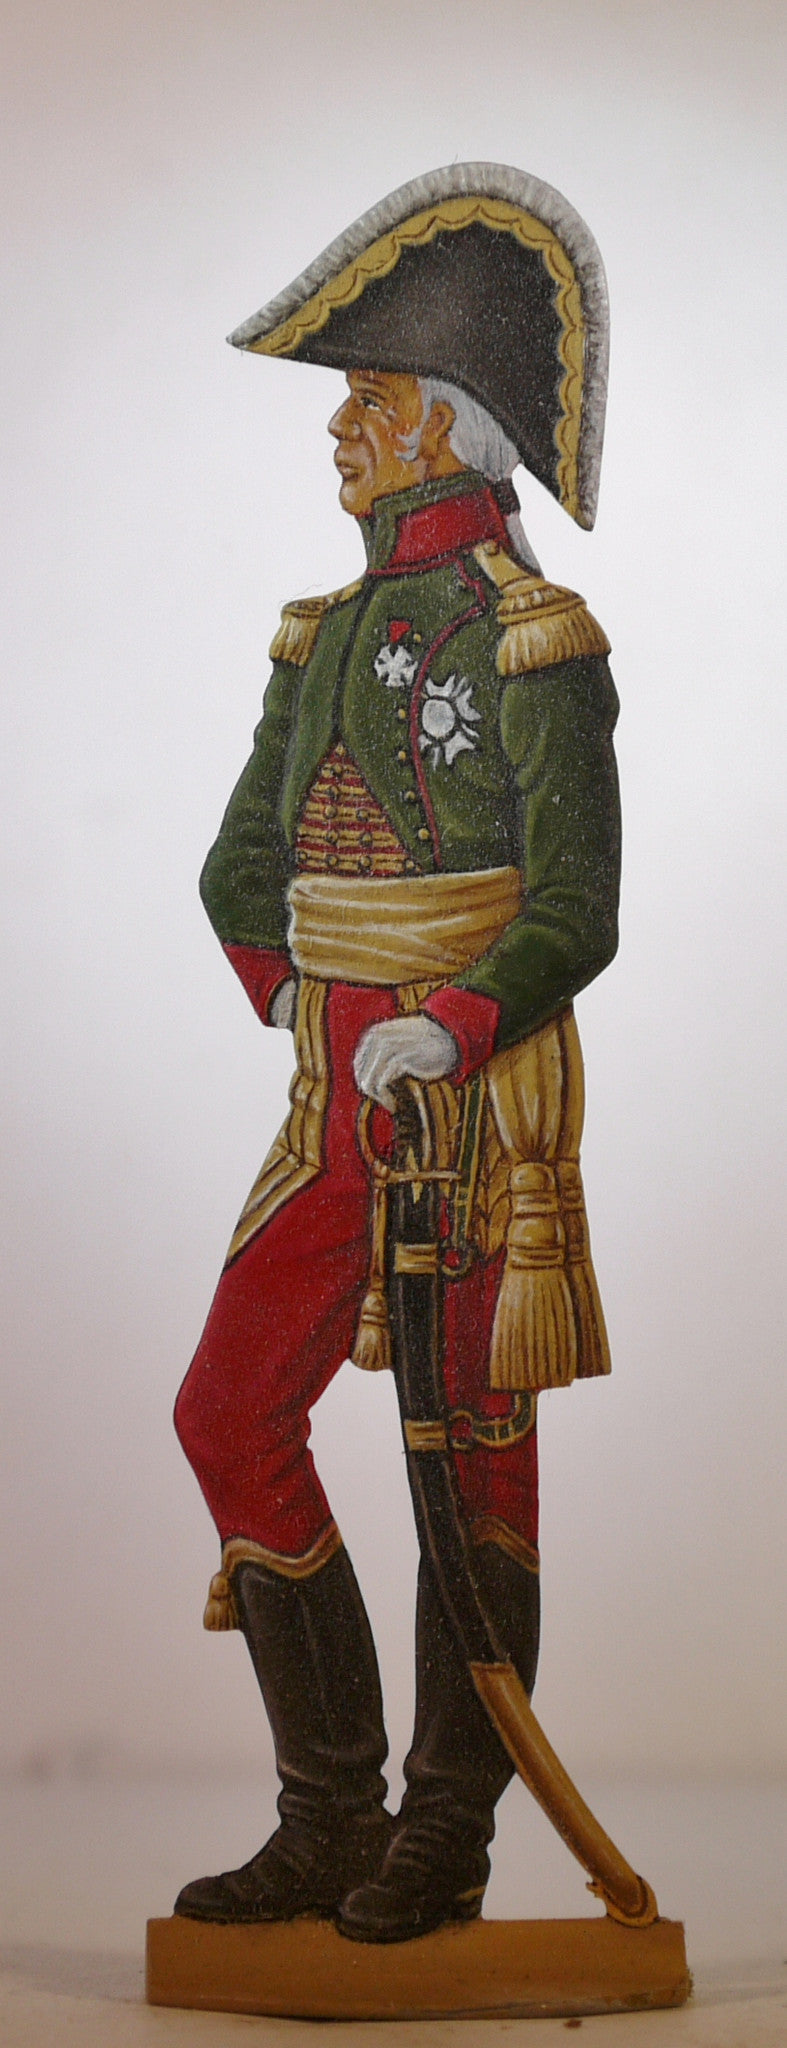 Marshal Bessieres - Glorious Empires-Historical Miniatures  